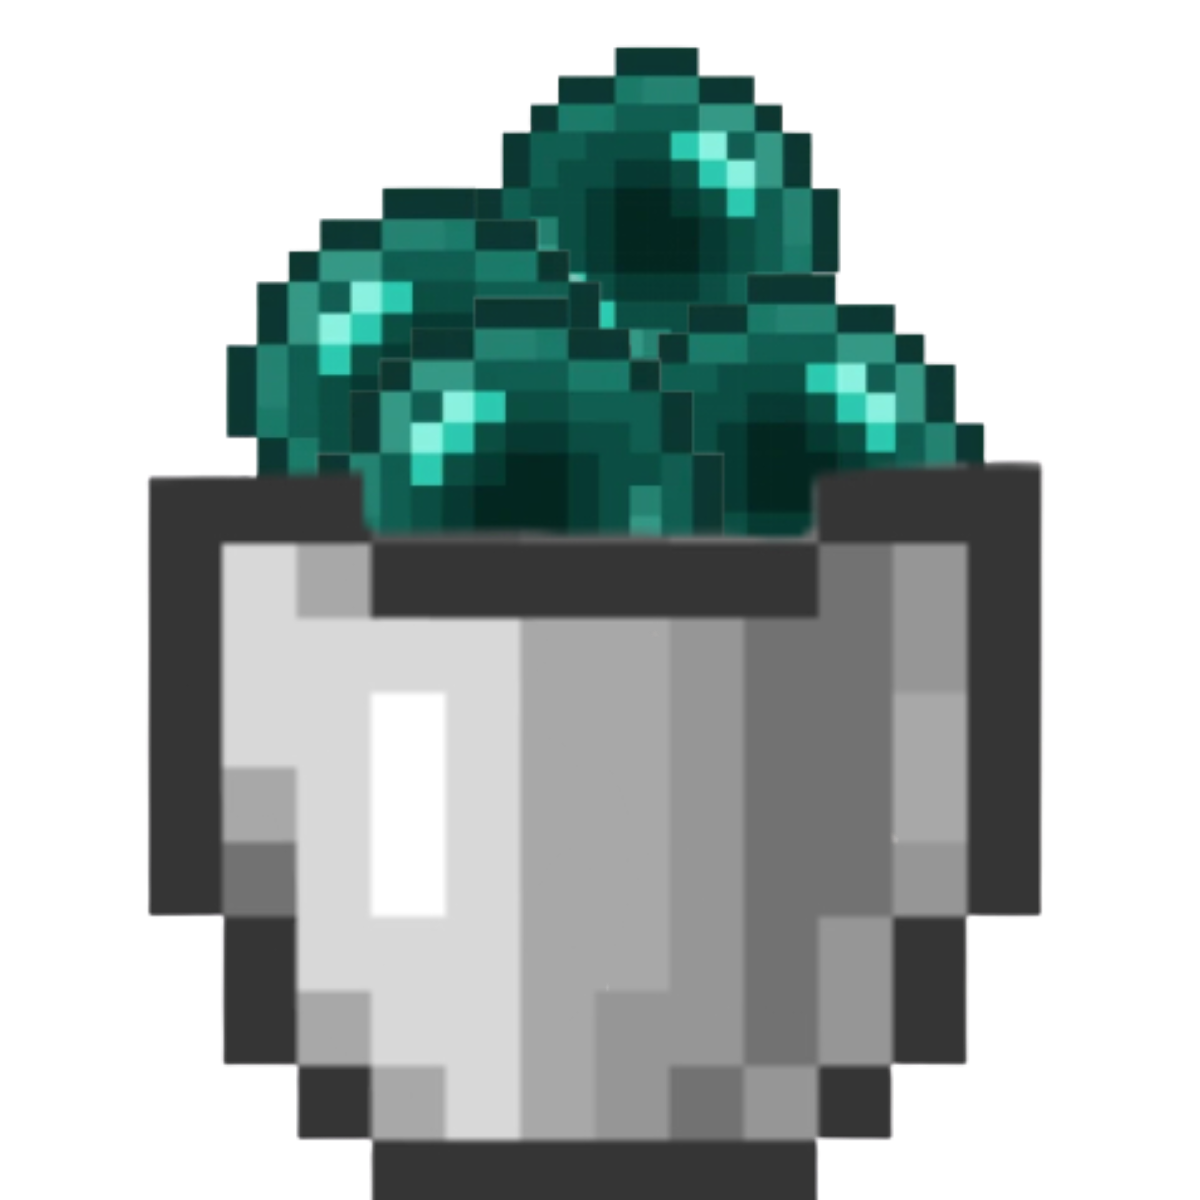 Minecraft resource pack showcase Ender pearl by UncleBob11 on DeviantArt